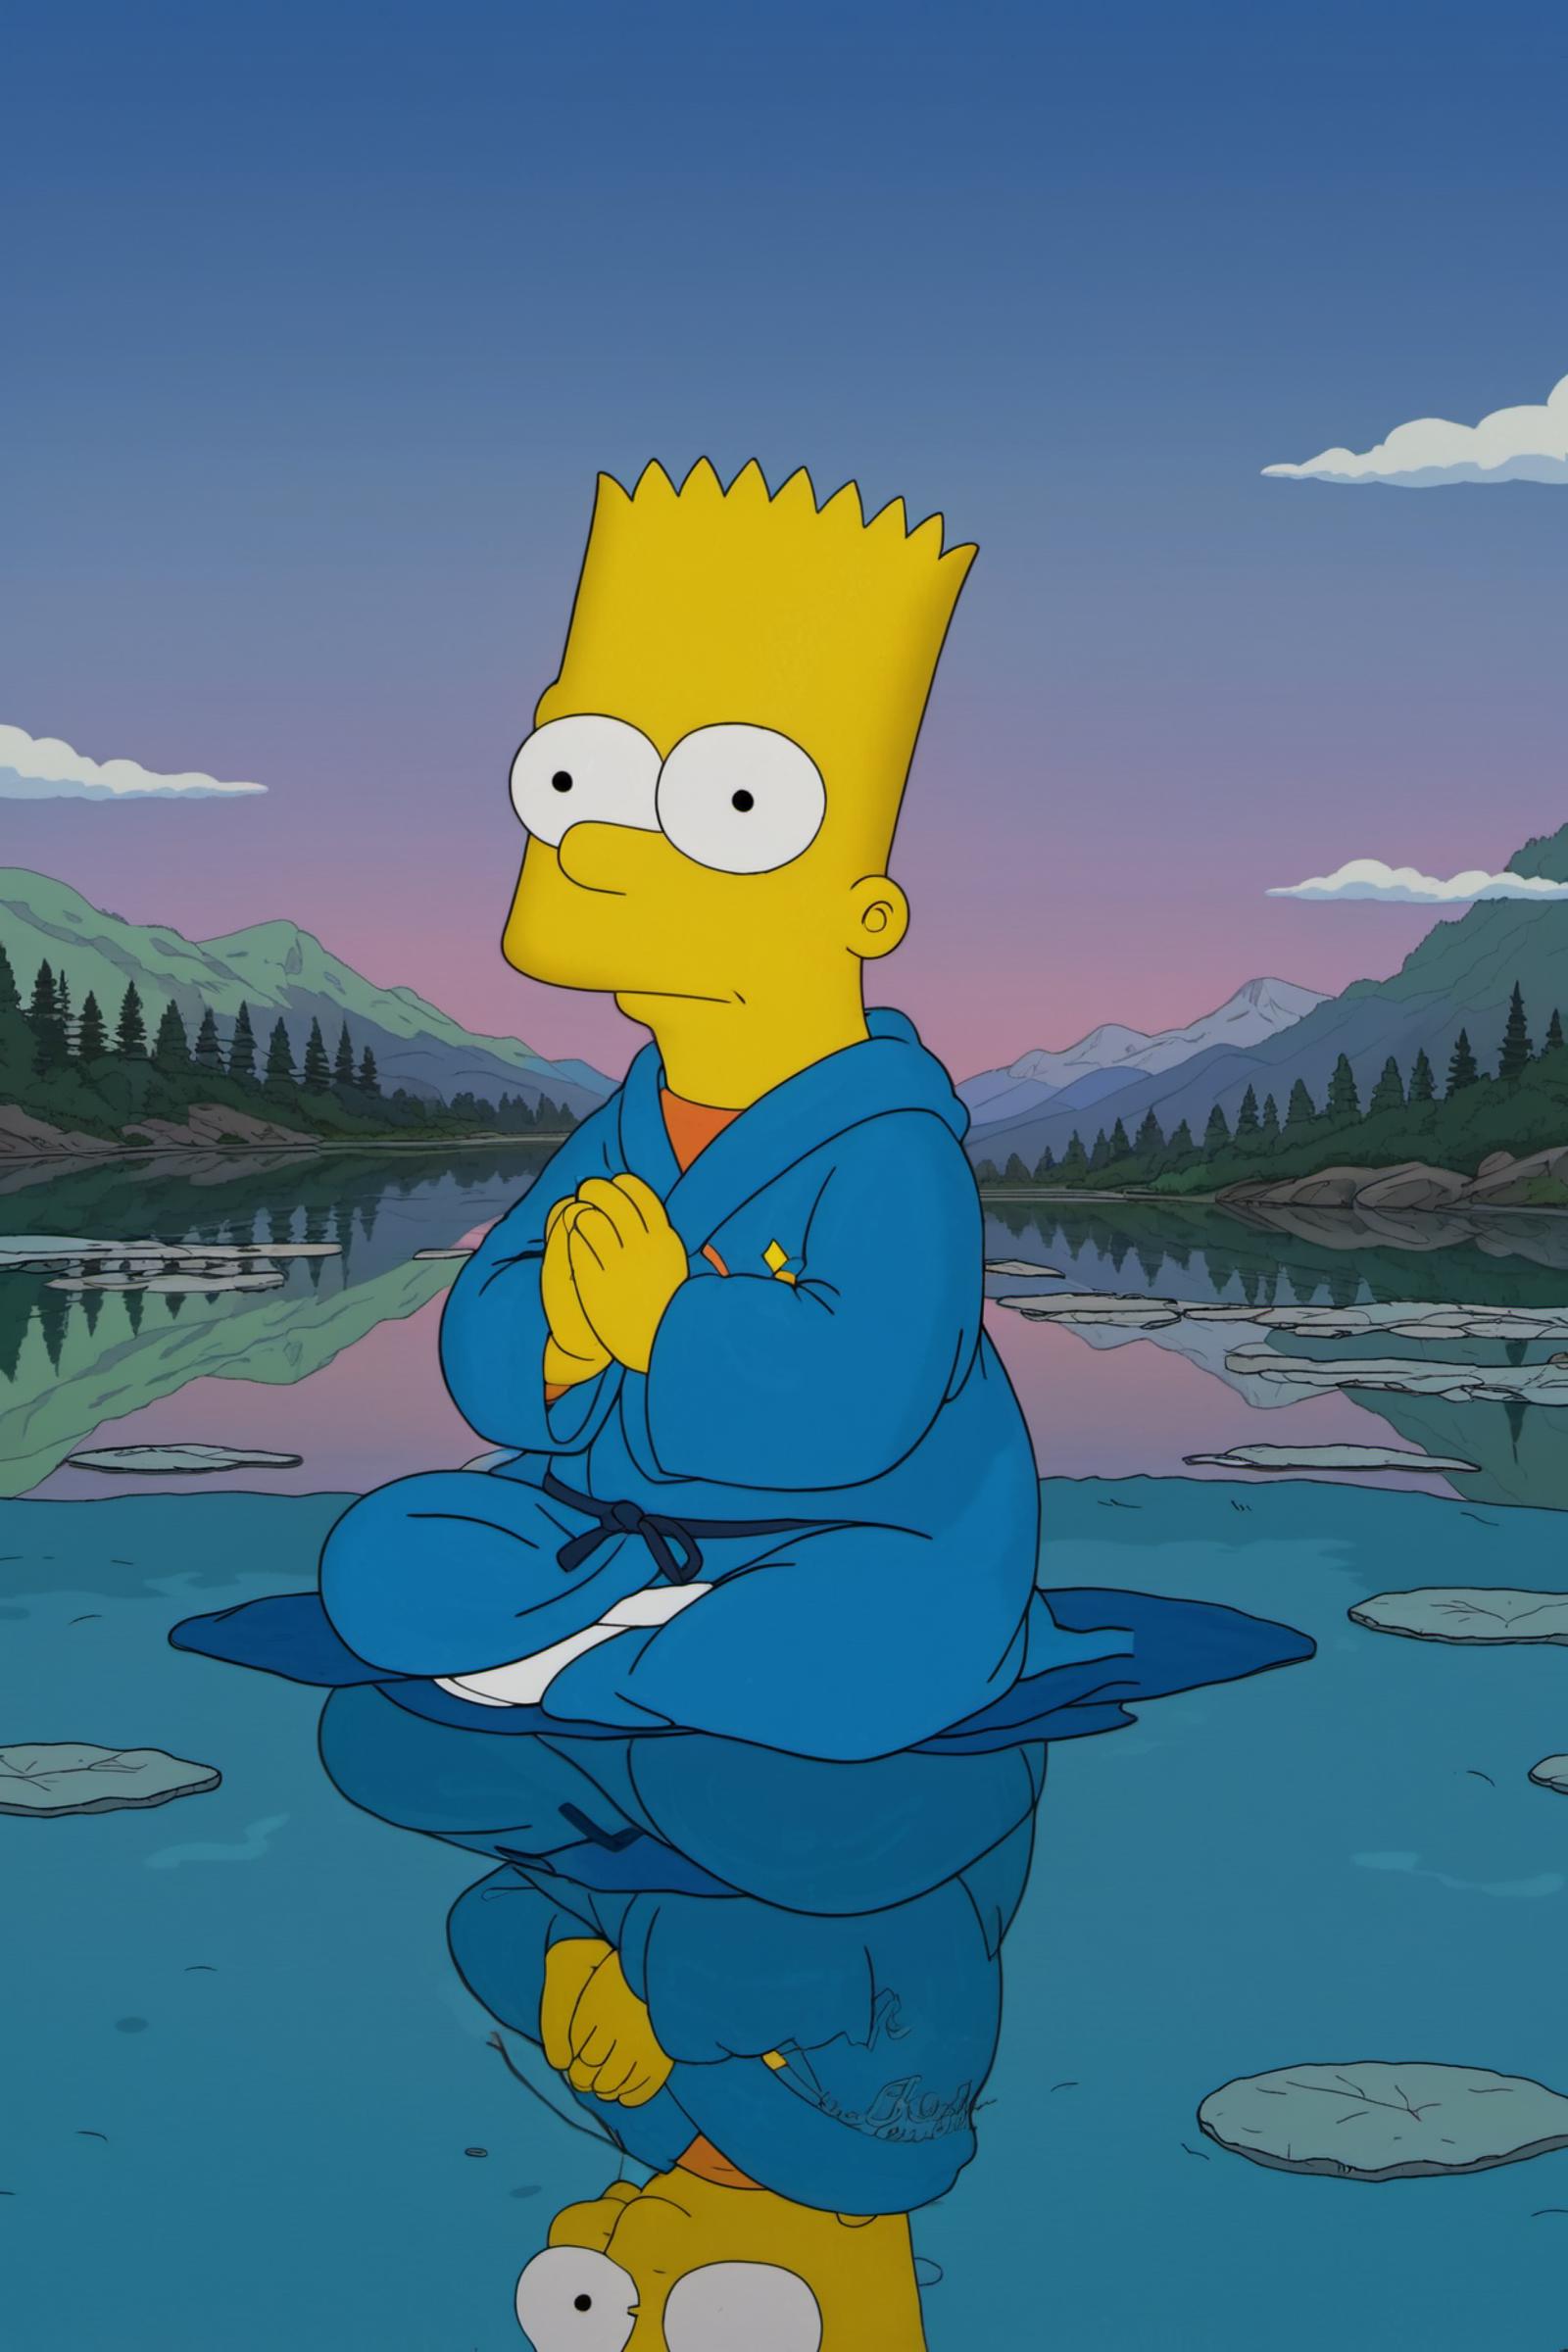 A cartoon image of Homer Simpson sitting cross-legged in a robe by a lake.